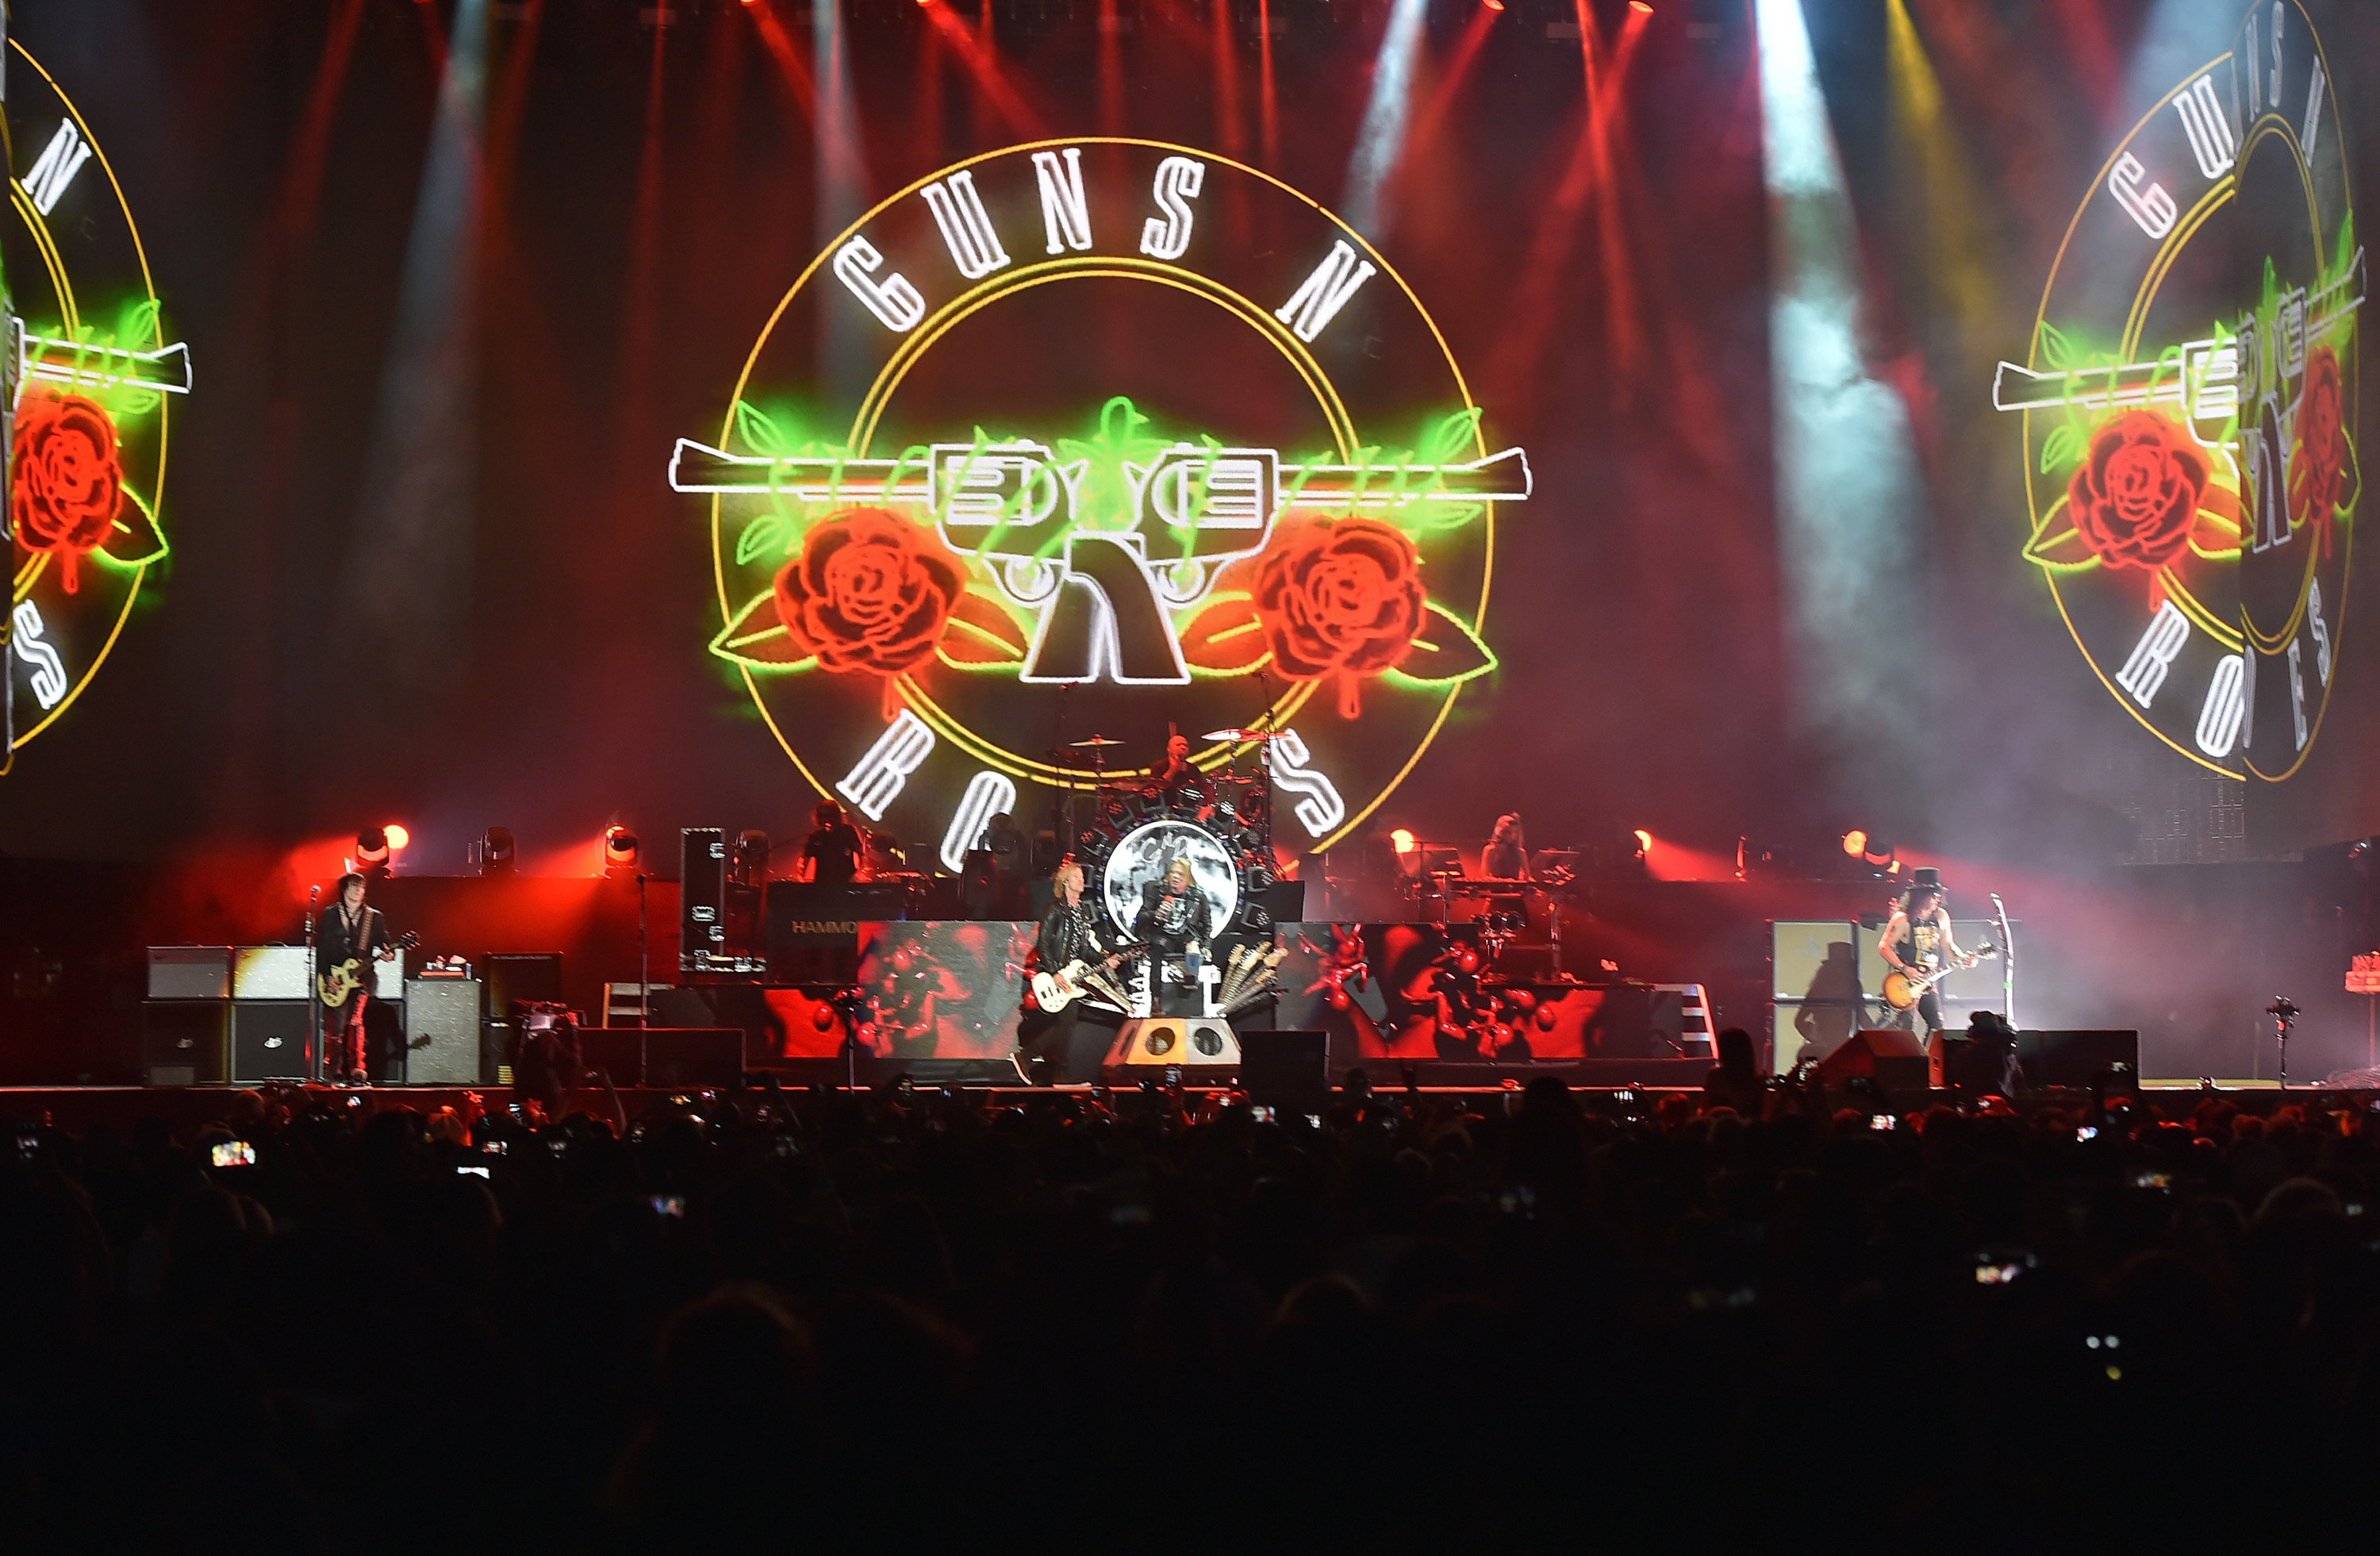 Watch GnR perform “The General” for the first time!